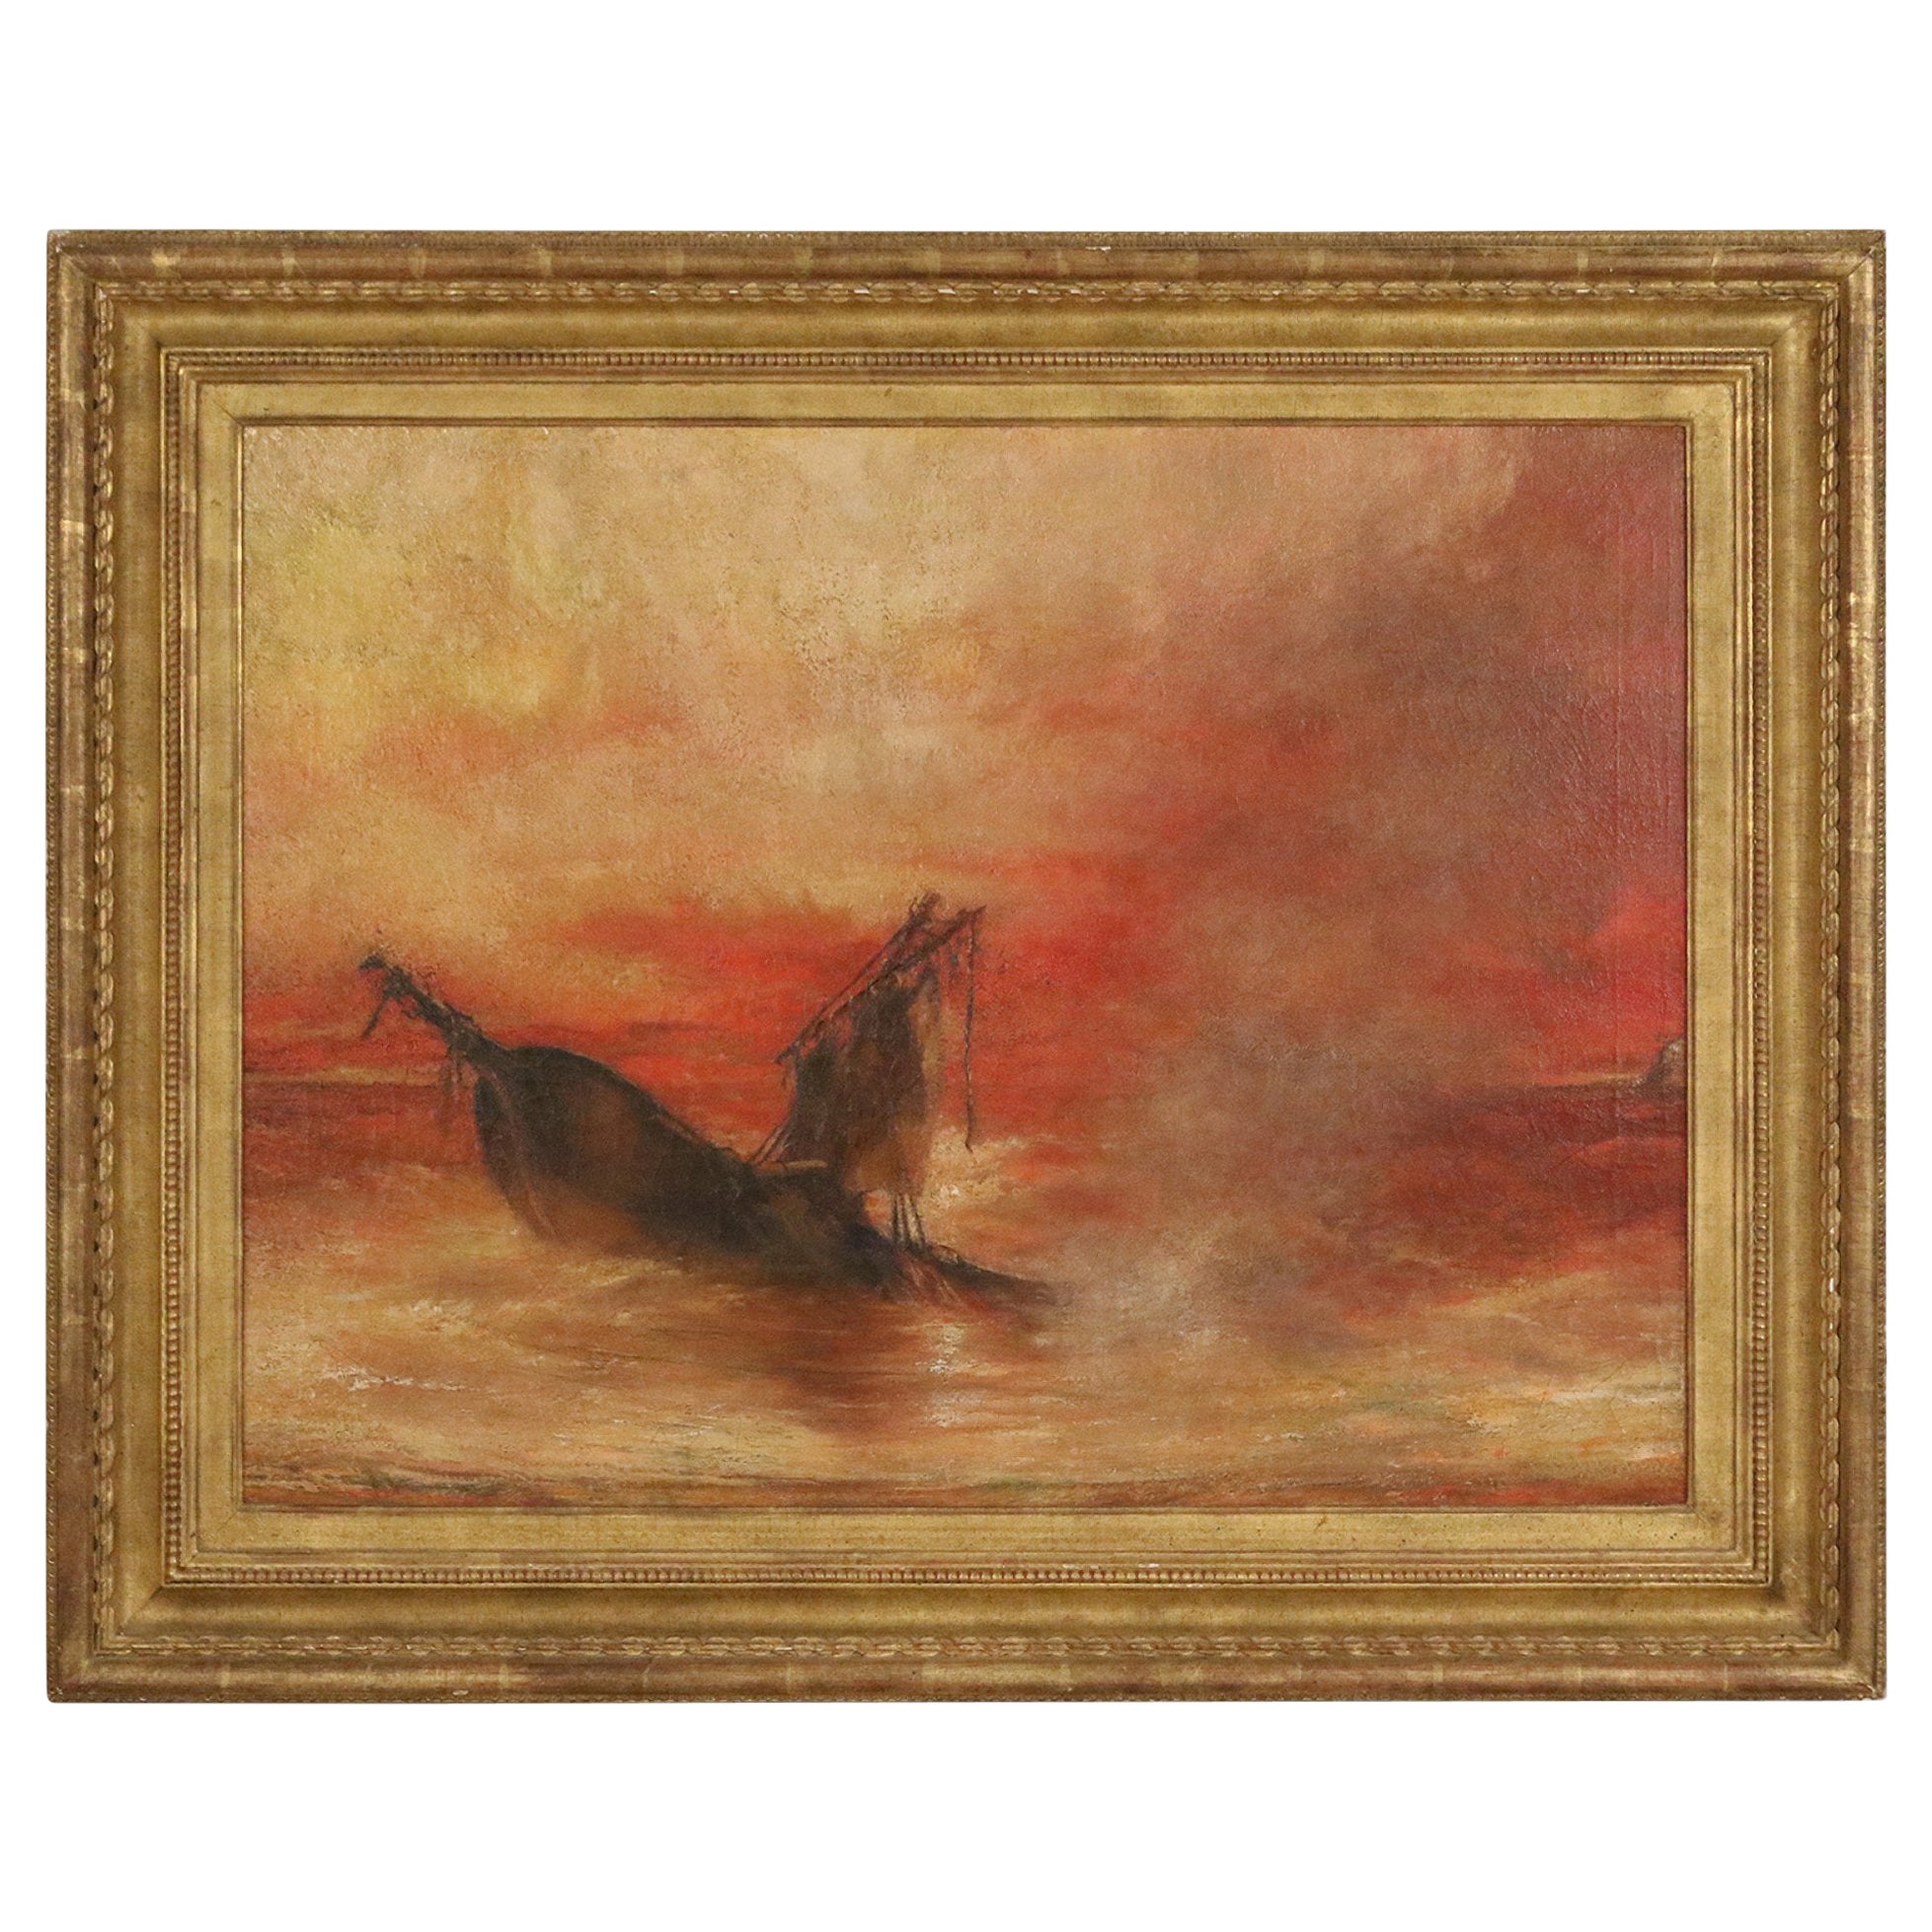 Framed Antique French Oil Painting of a Burning Shipwreck at Sunset